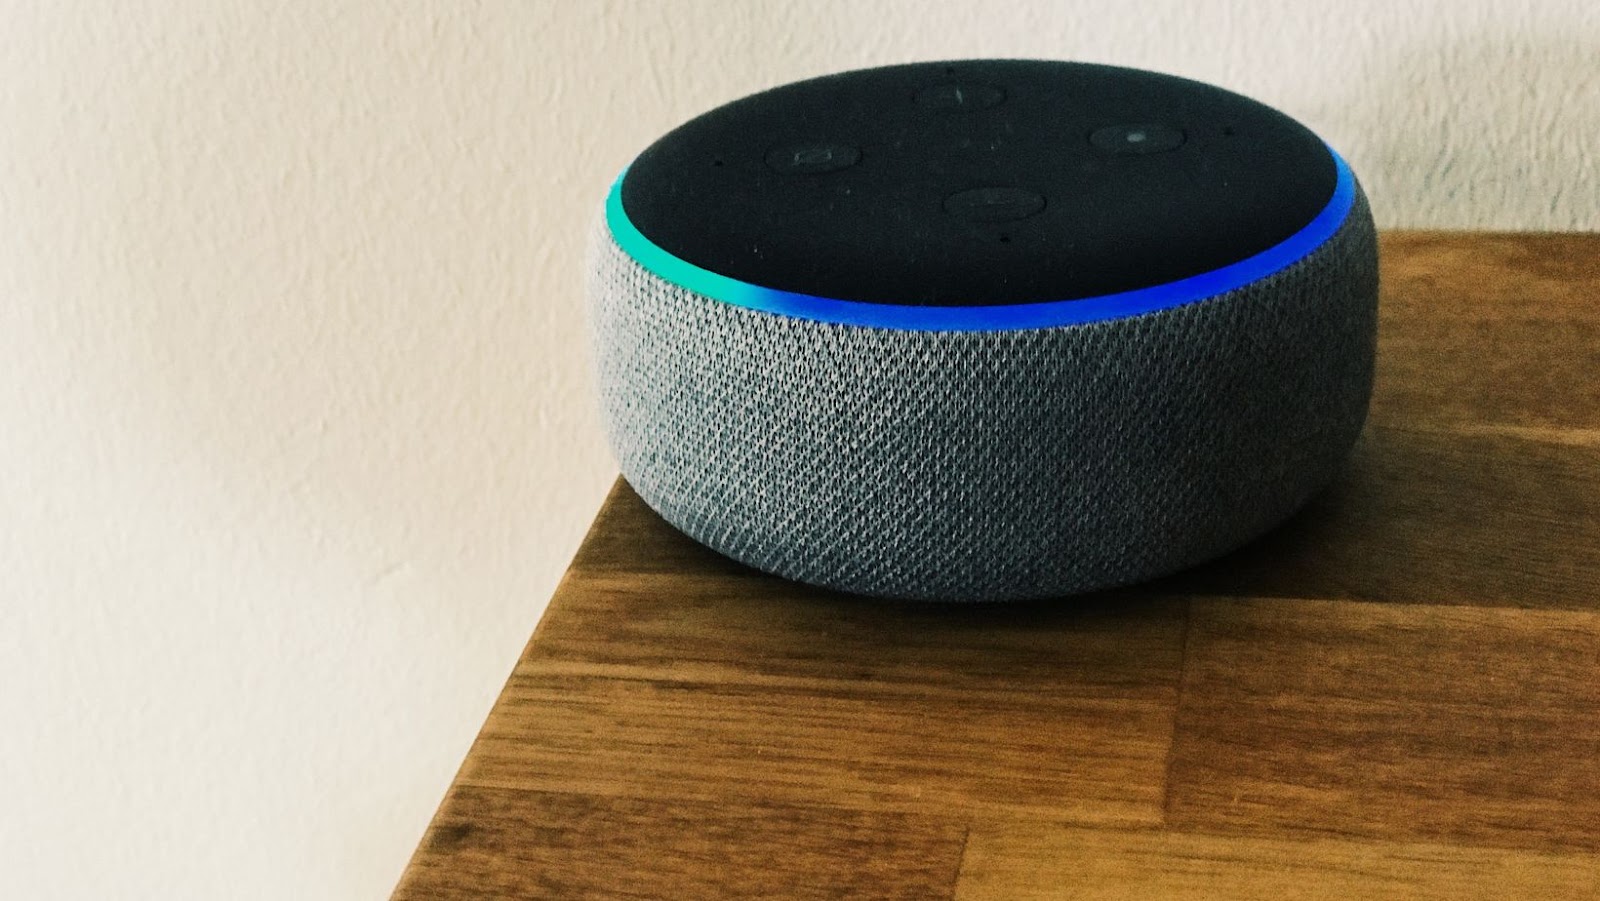 Echo Dot vs Google Home: Which One is the Best Smart Speaker?